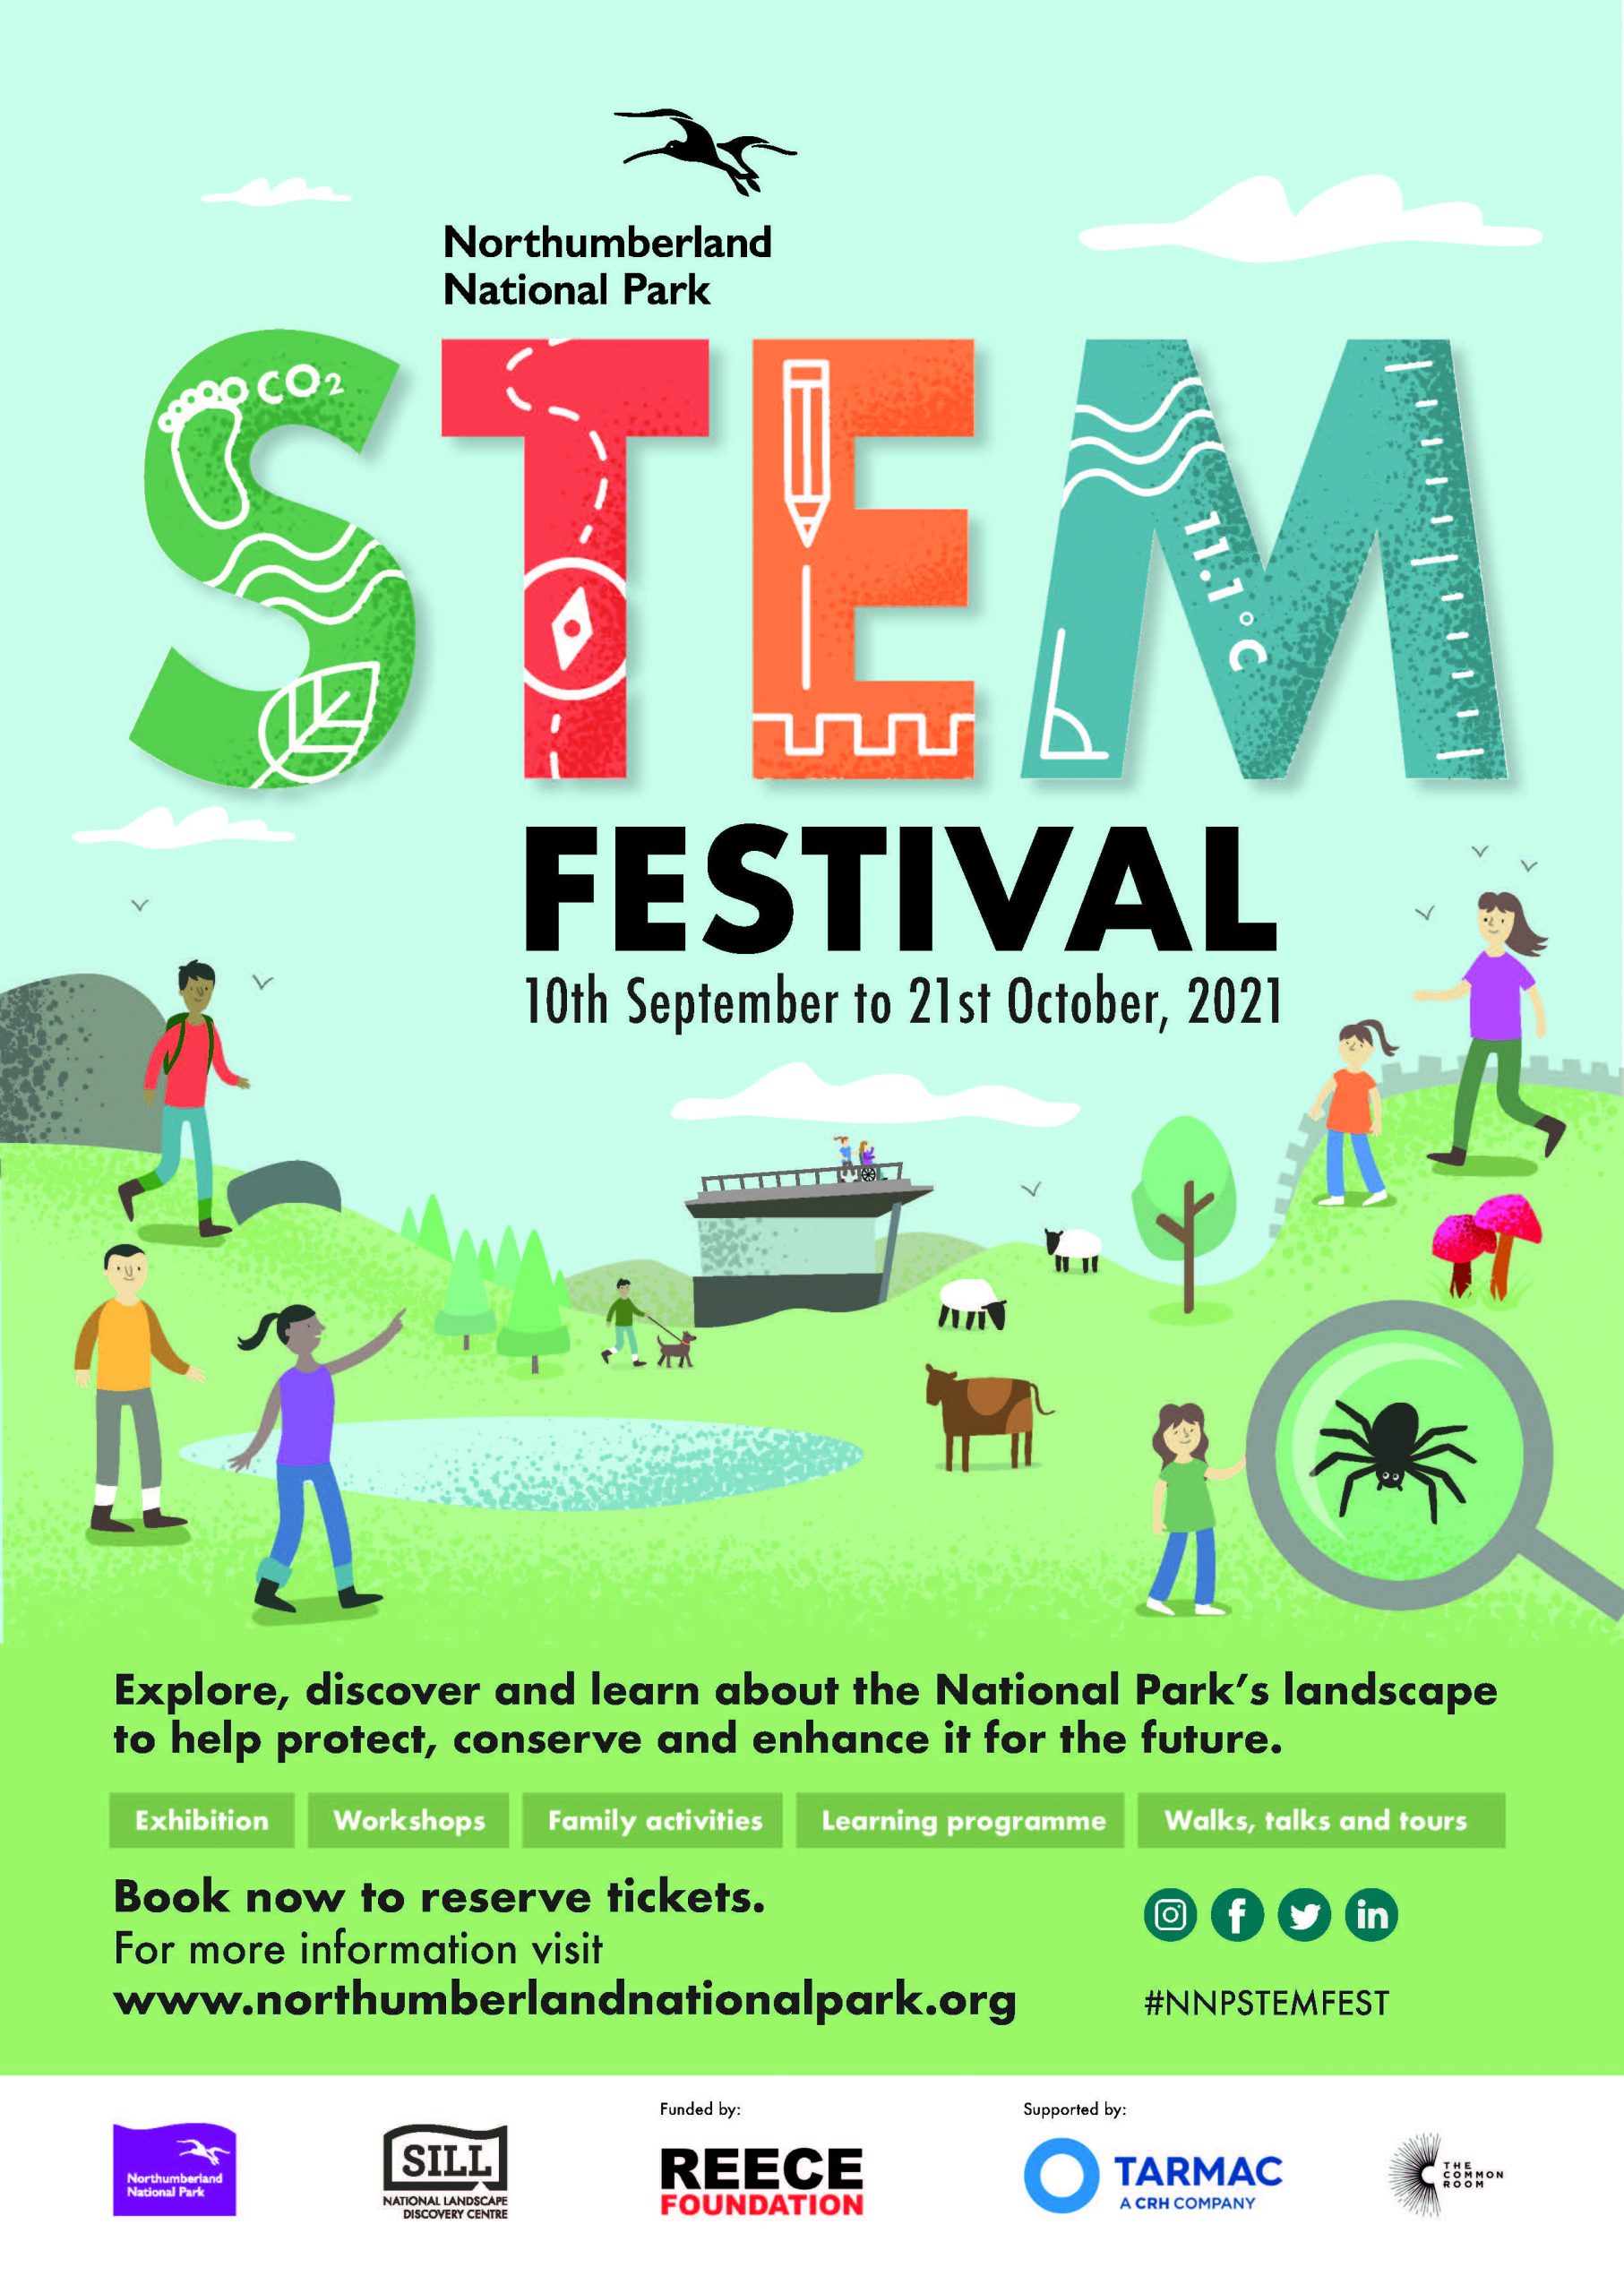 Tarmac supports Northumberland National Park’s first STEM festival Tarmac